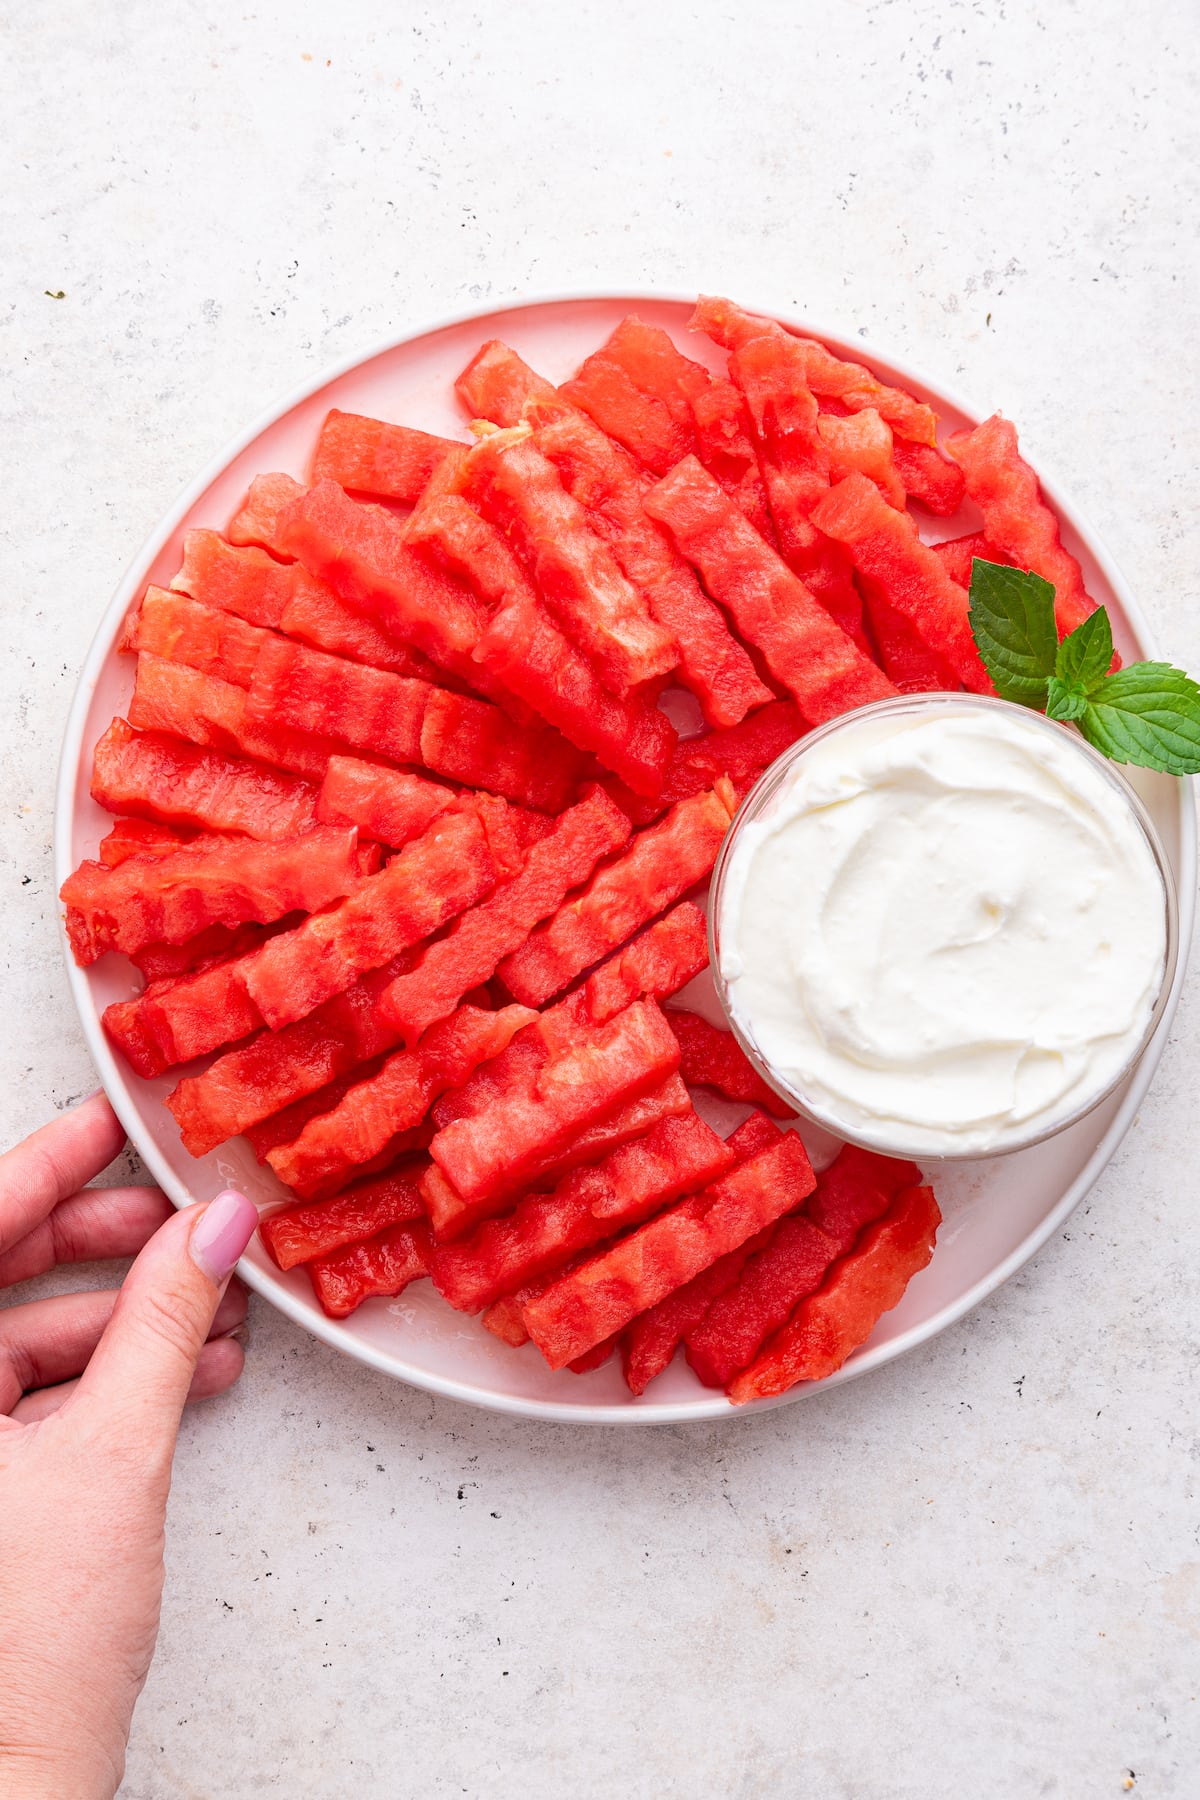 A woman's hand grabbing a plate of watermelon fries served with a yogurt dip.